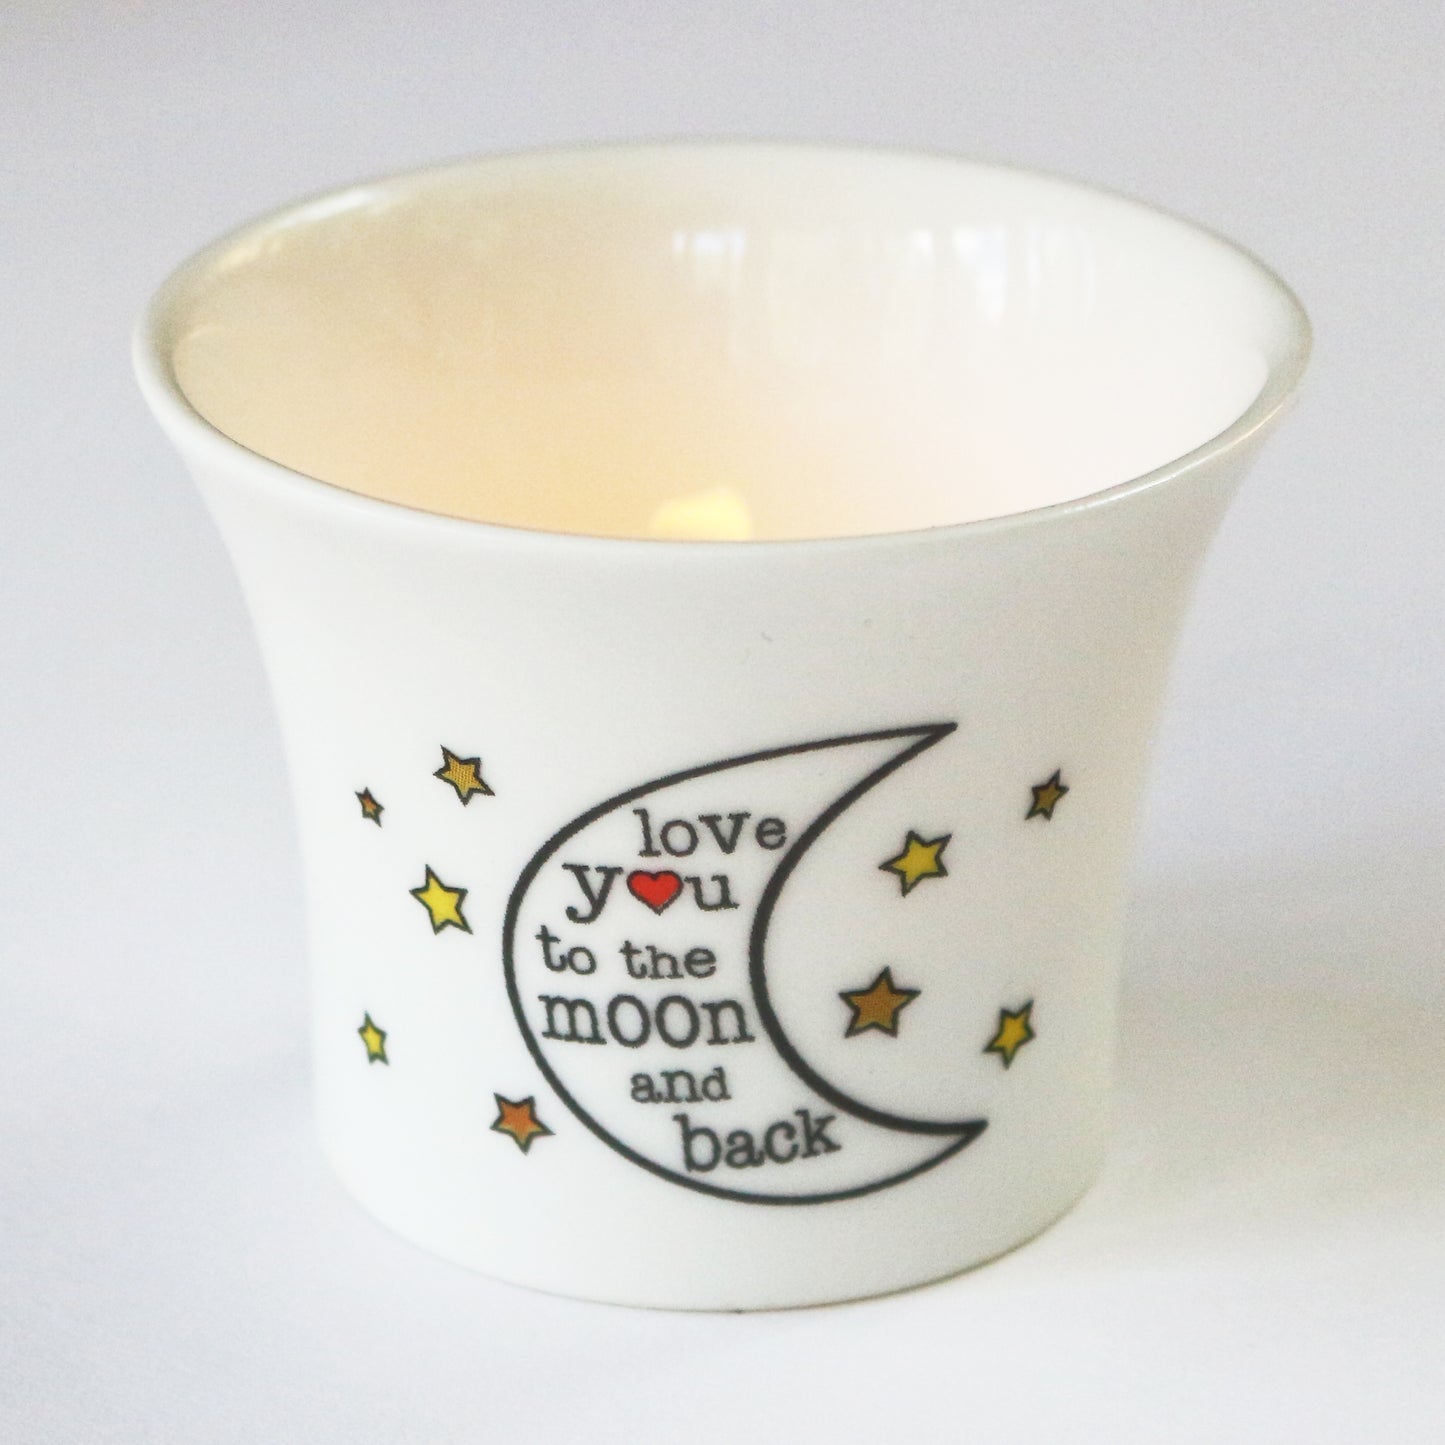 Bone China Tea Light Holder - Love you to the Moon and Back